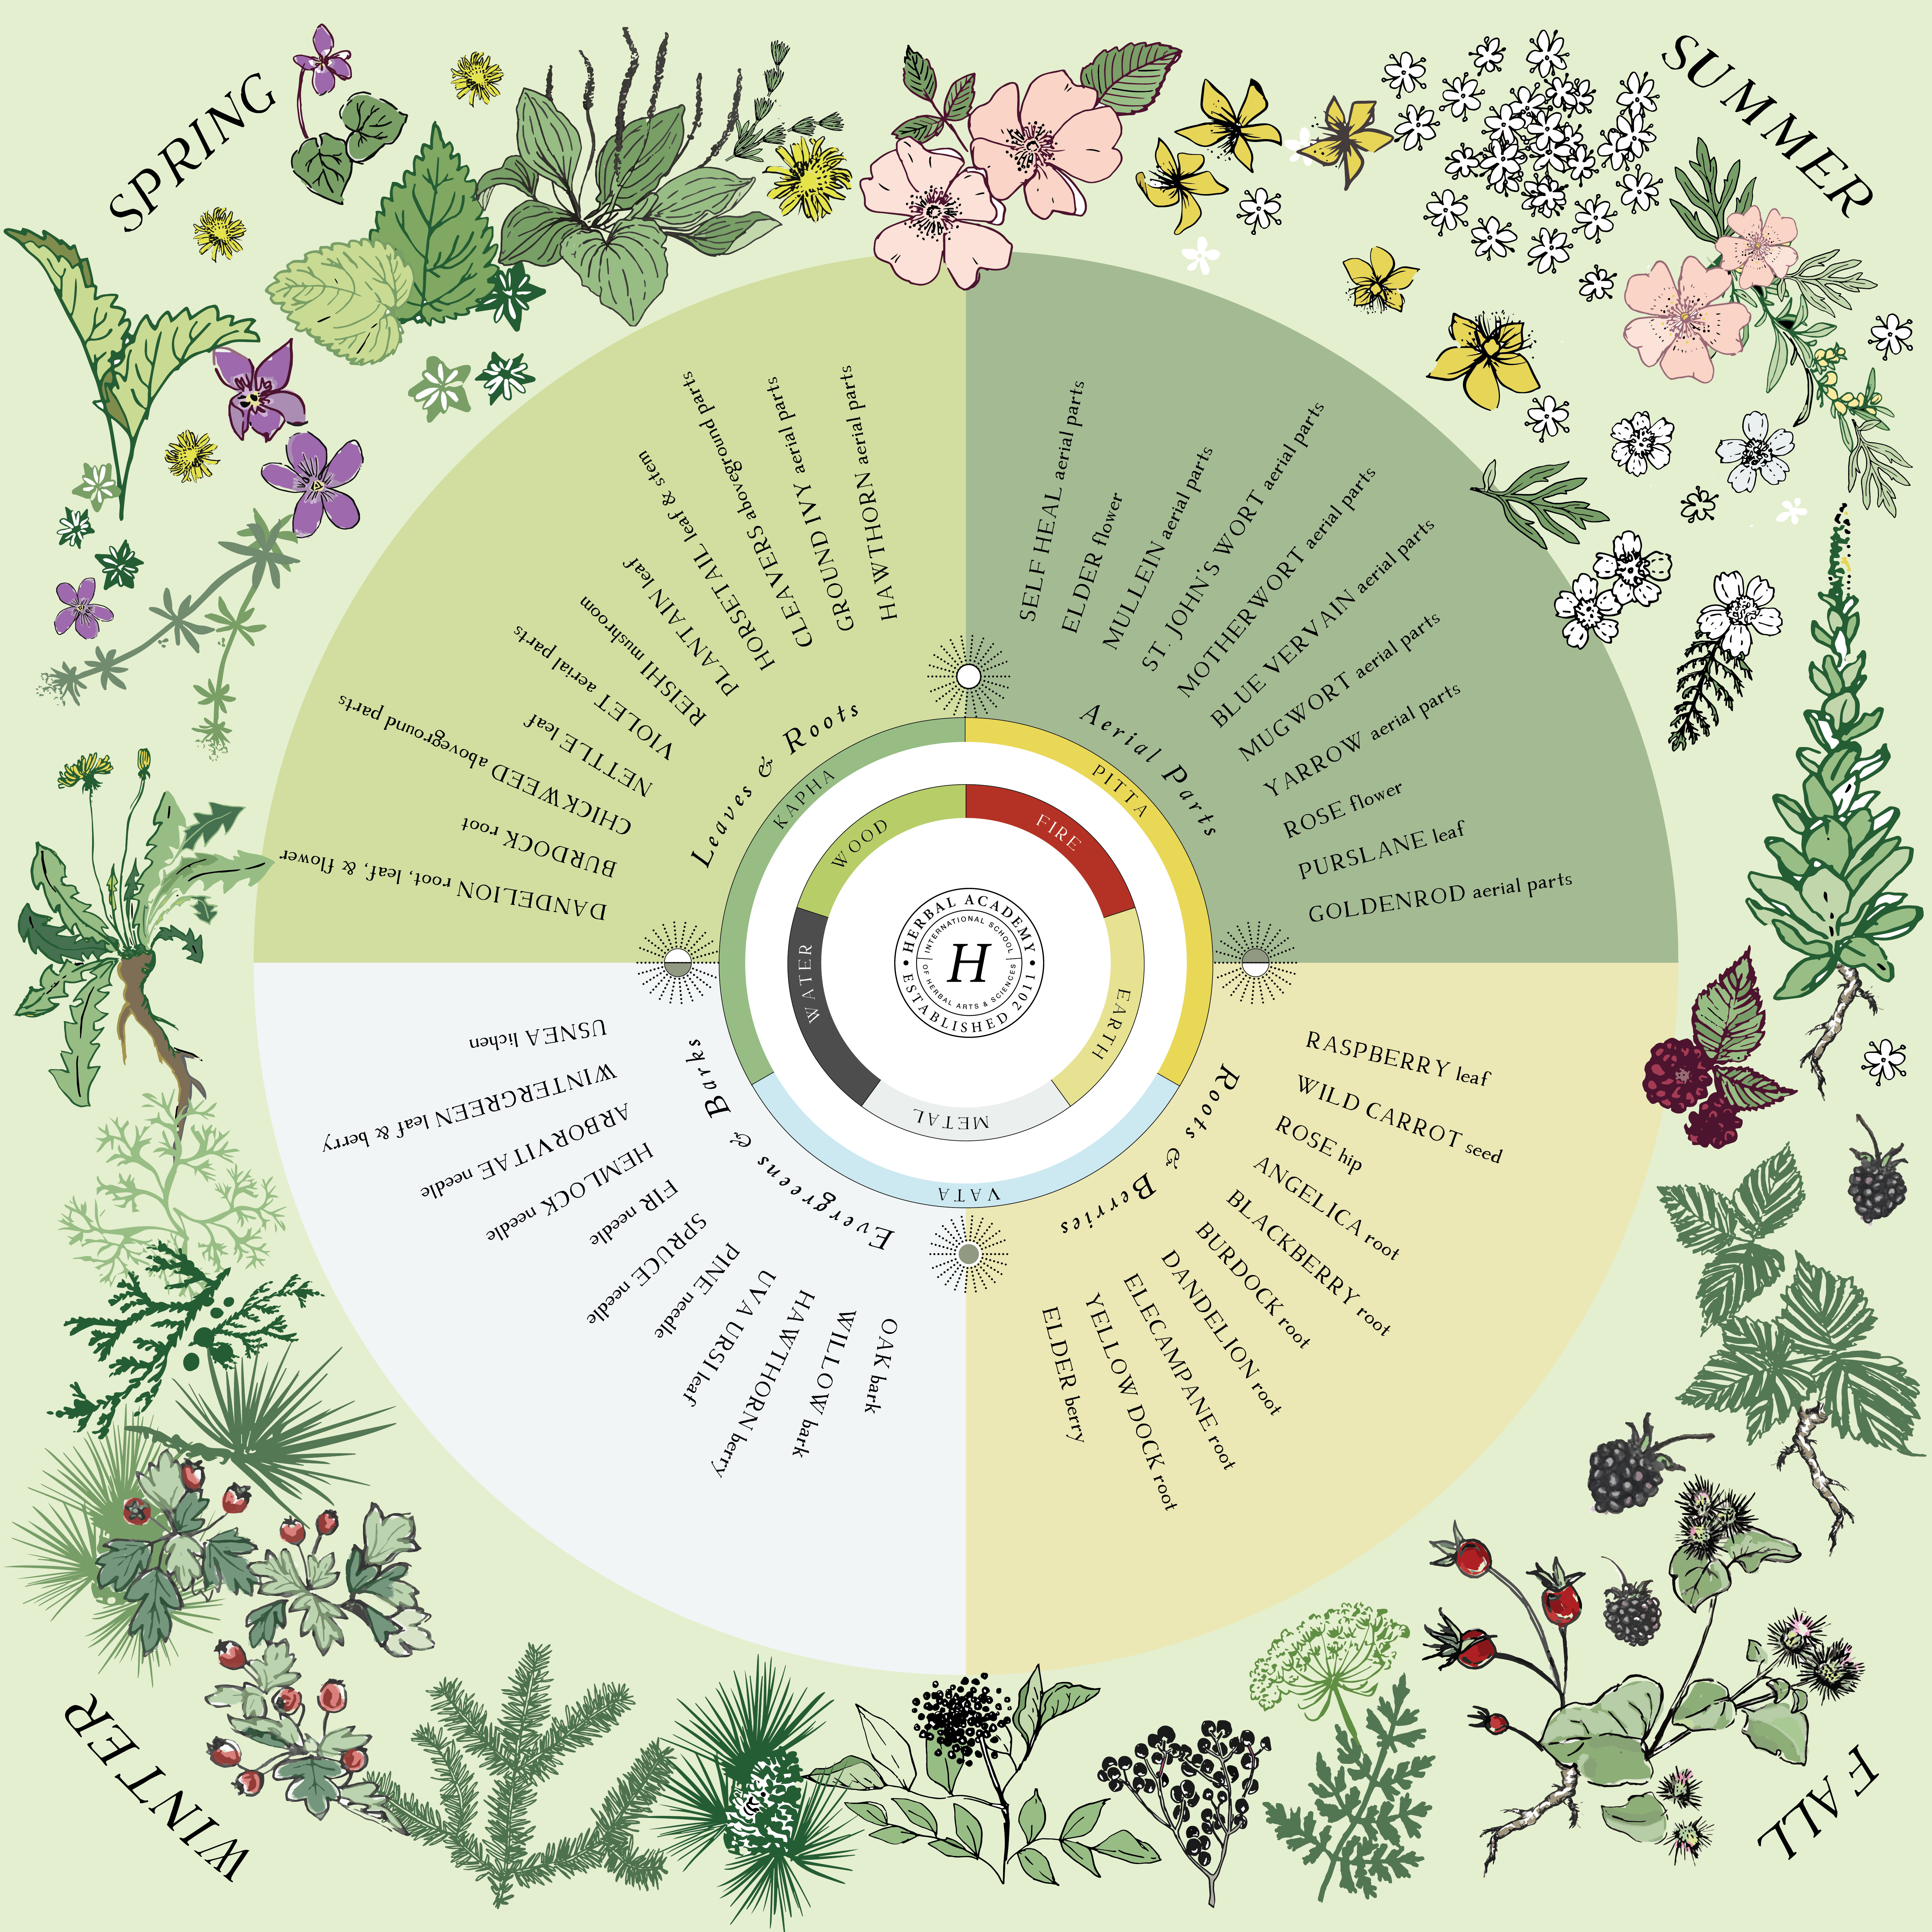 Seasonal Foraging Poster by the Herbal Academy